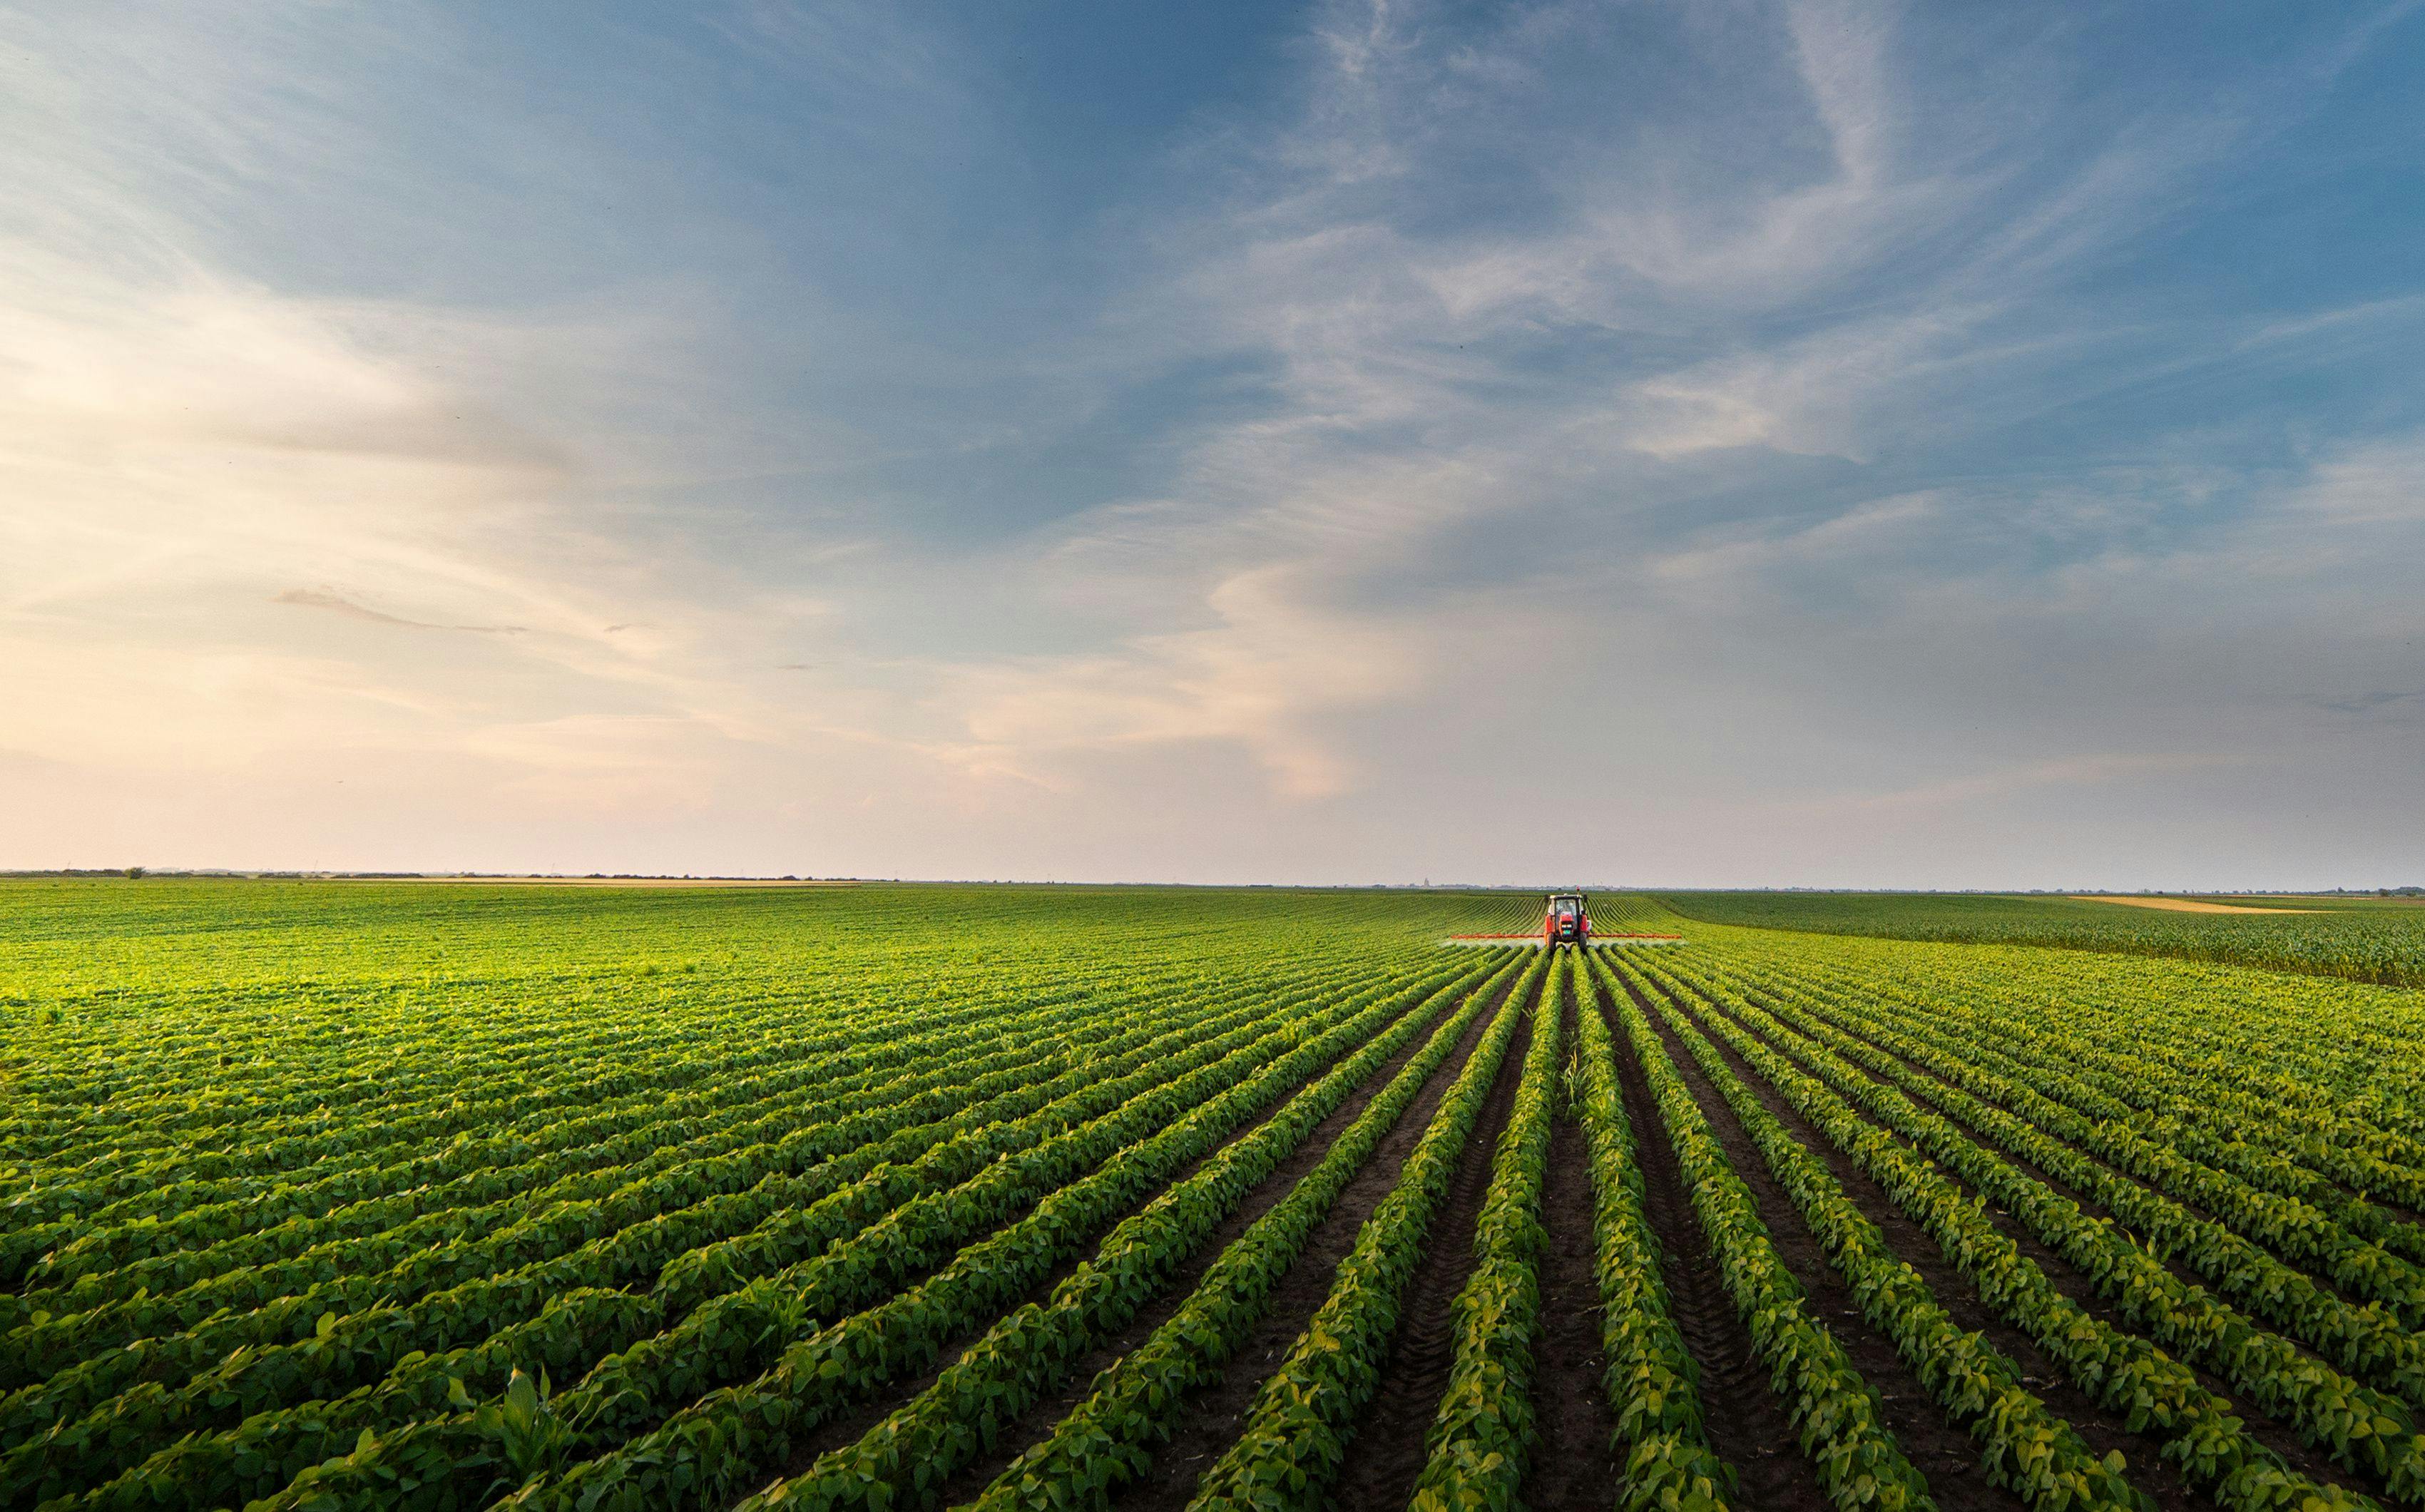 Tractor spraying soybean field in sunset | Image Credit: © Dusan Kostic - stock.adobe.com